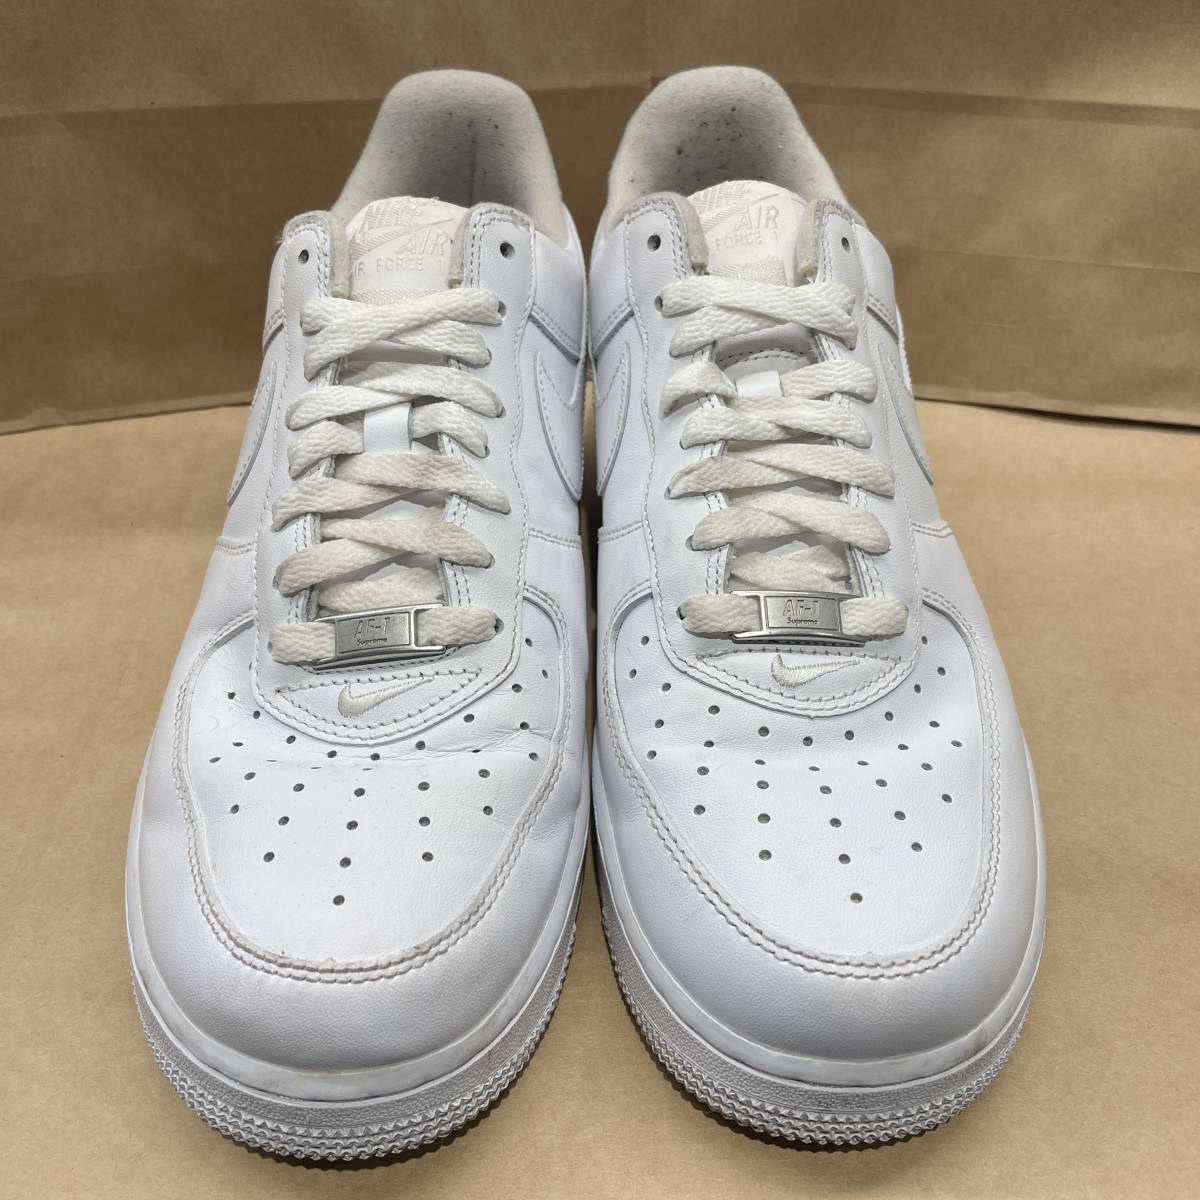 US8 26cm NIKE AIR FORCE 1 LOW SUPREME CU9225-100 WHITE/RED ナイキ